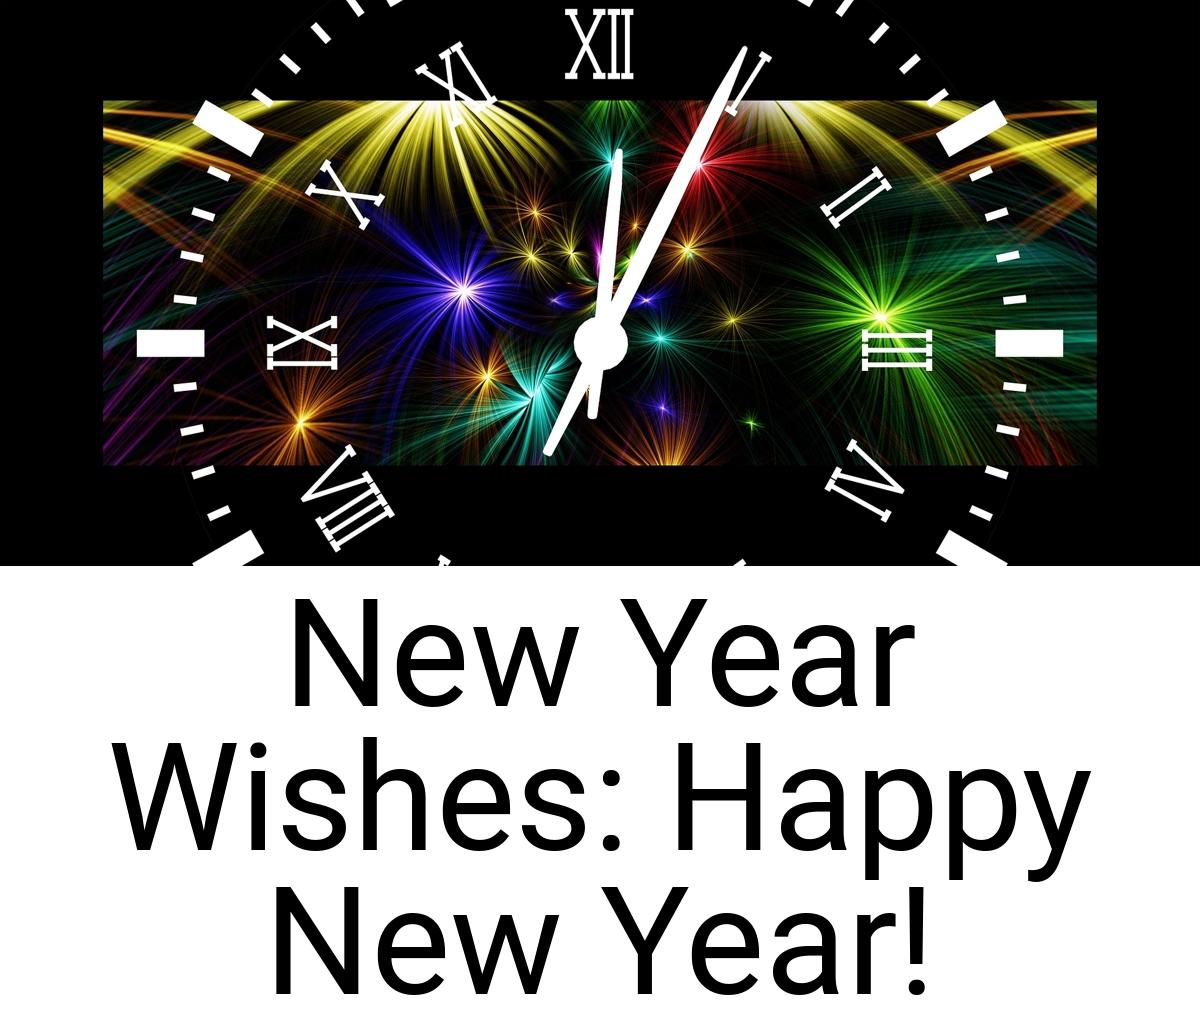 New Year Wishes: Happy New Year